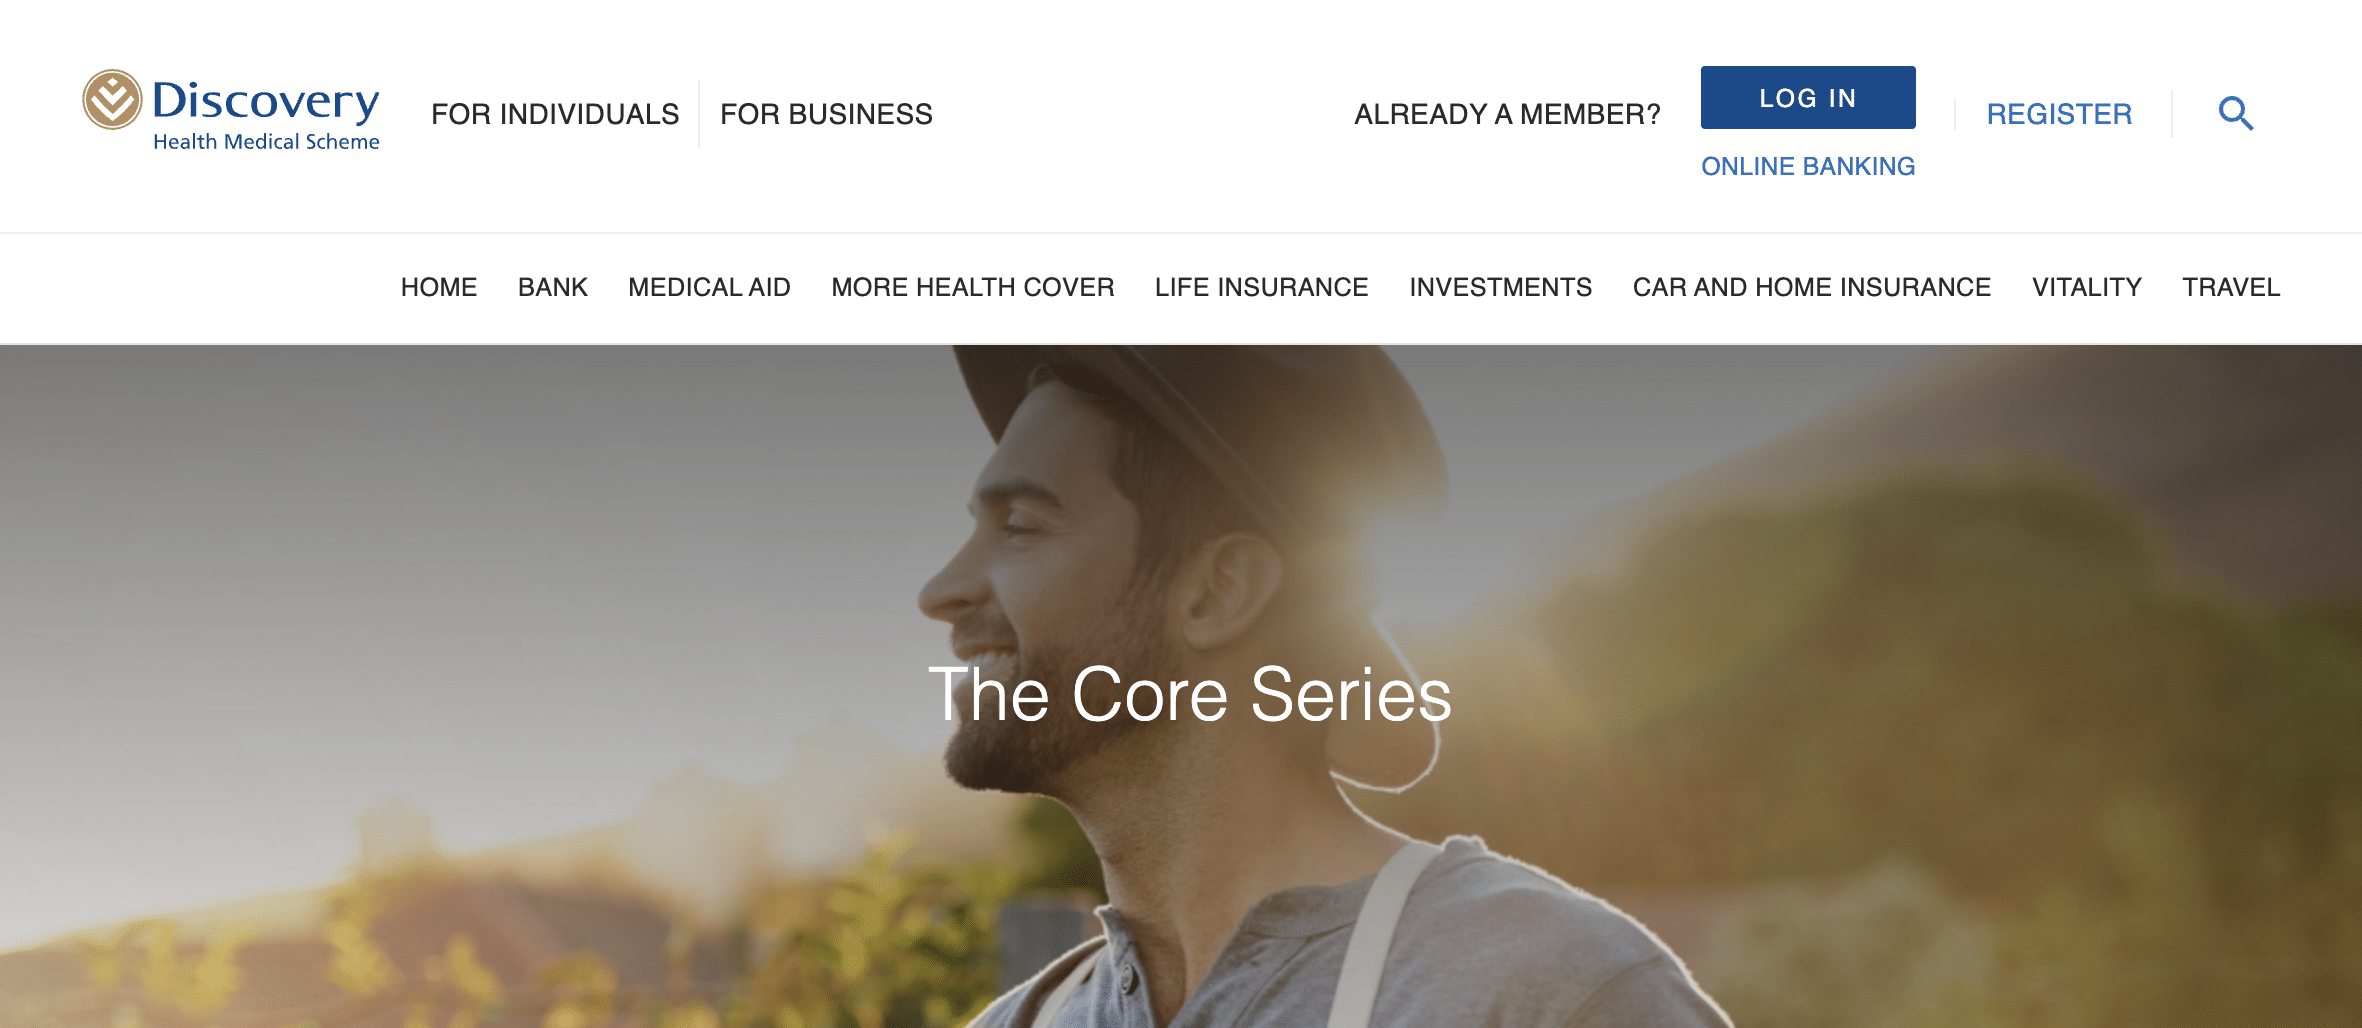 The Core Series